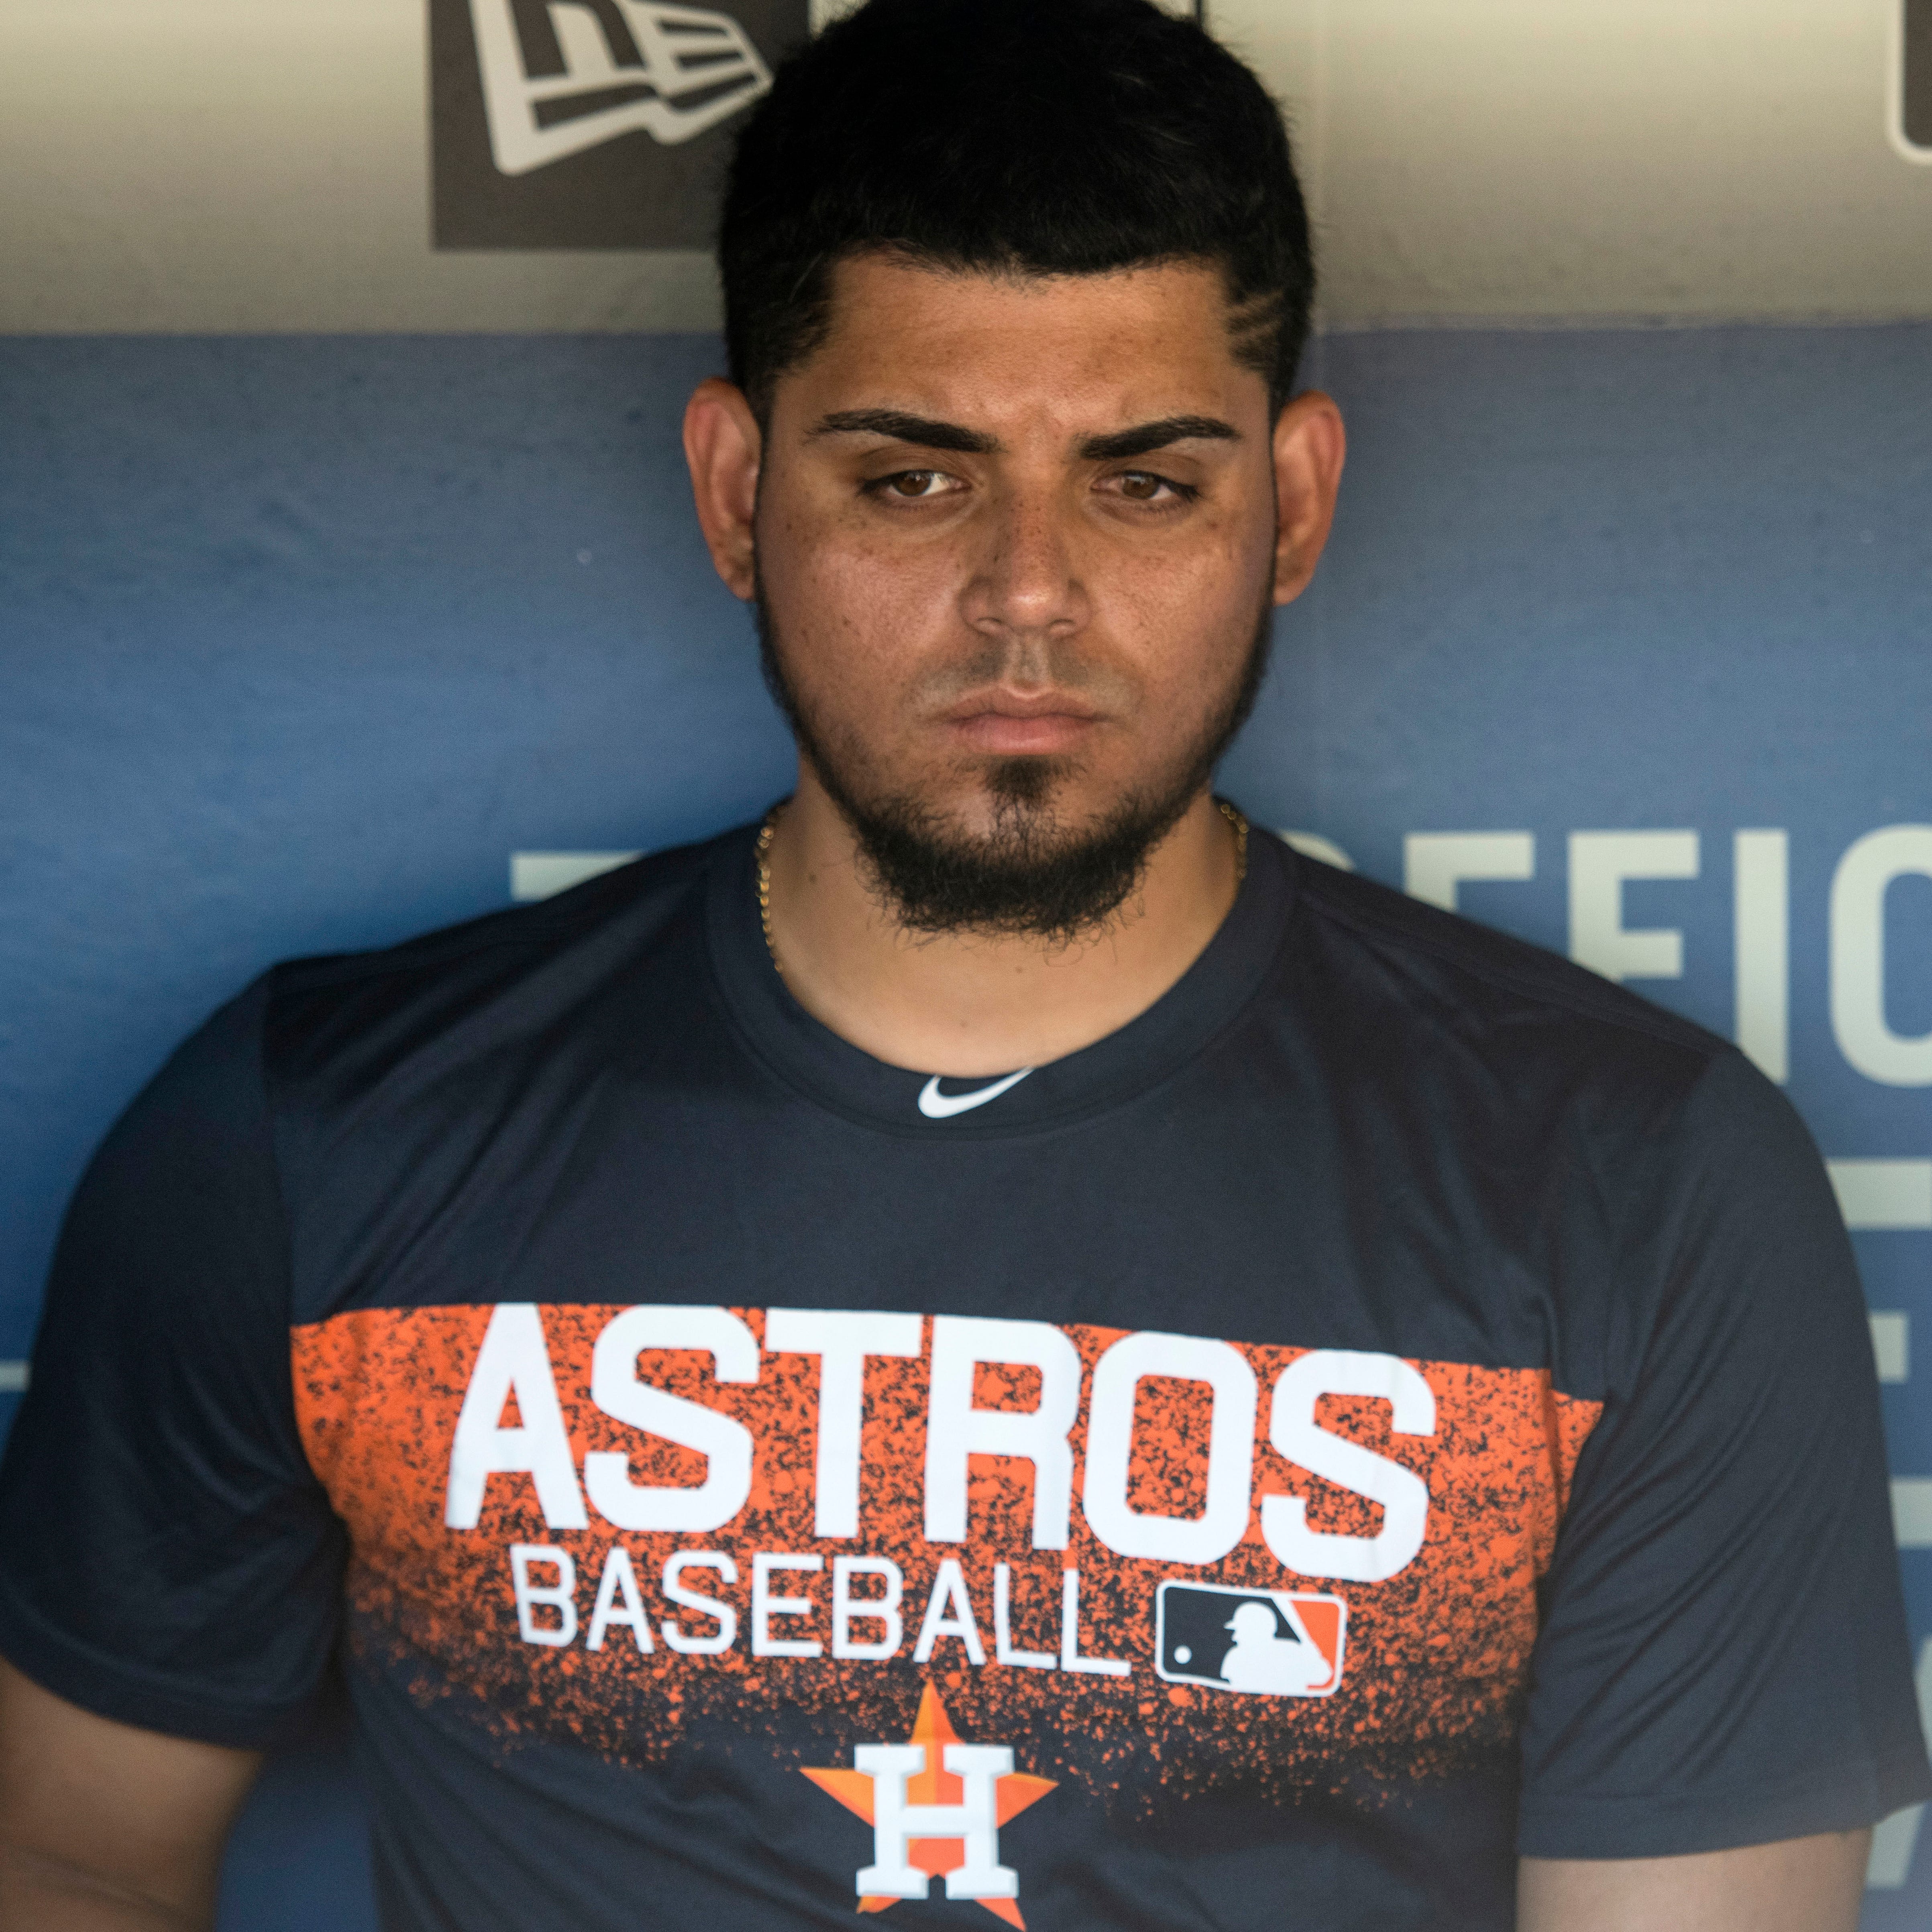 Houston Astros relief pitcher Roberto Osuna is interviewed in the dugout before a game against the Los Angeles Dodgers on Sunday.